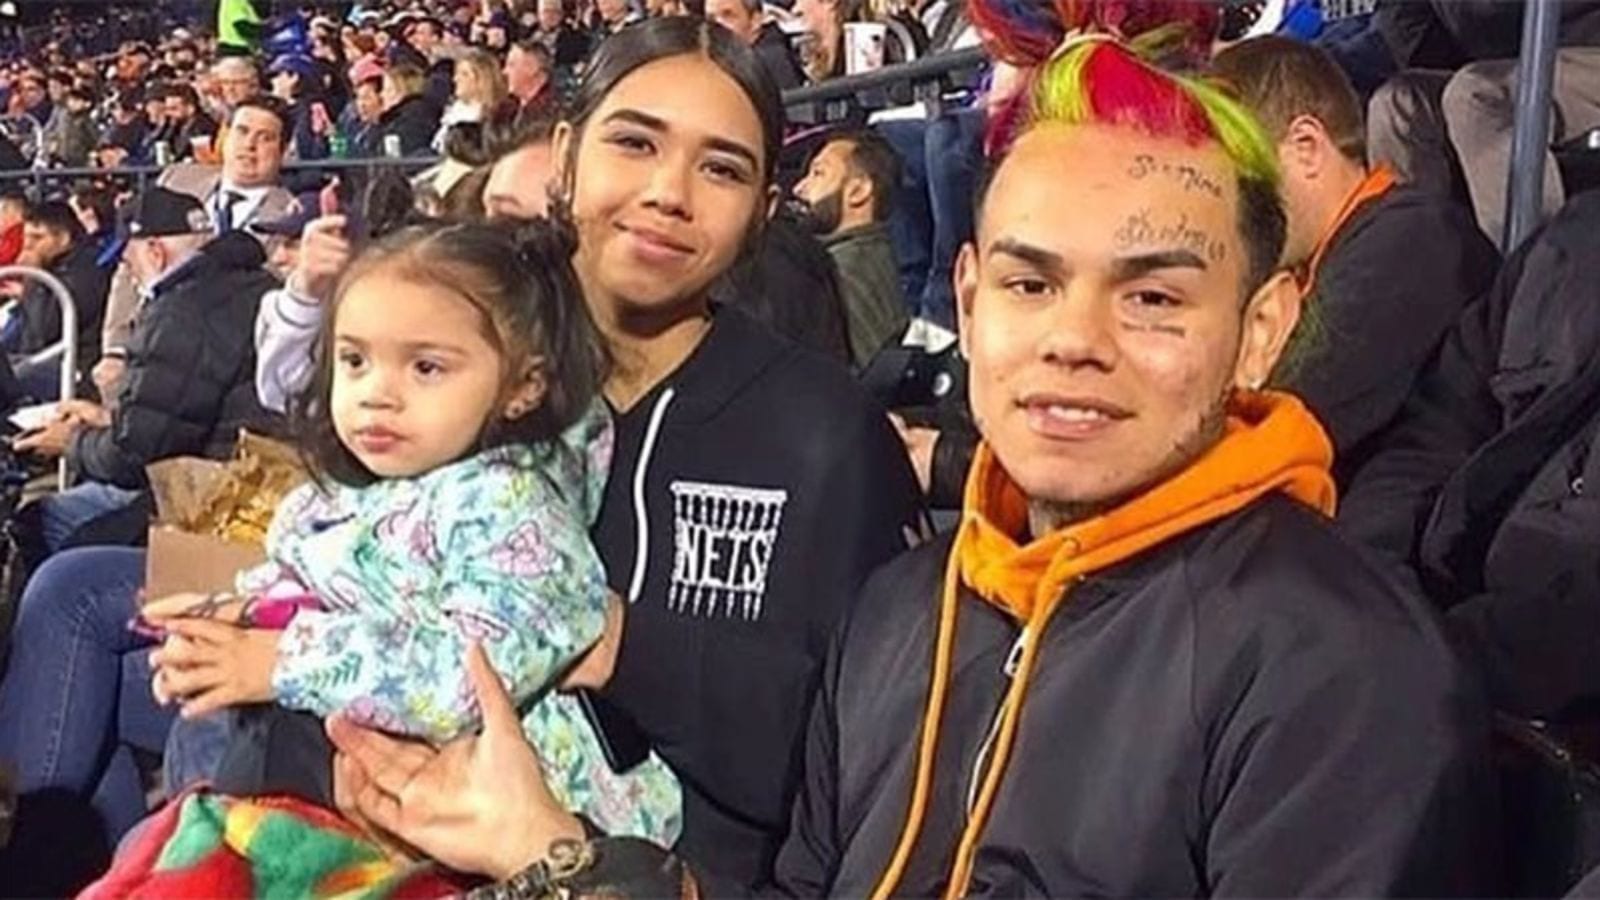 Mother Of 6ix9ine’s Daughter Claims They Have Been Receiving Threats On Their Life